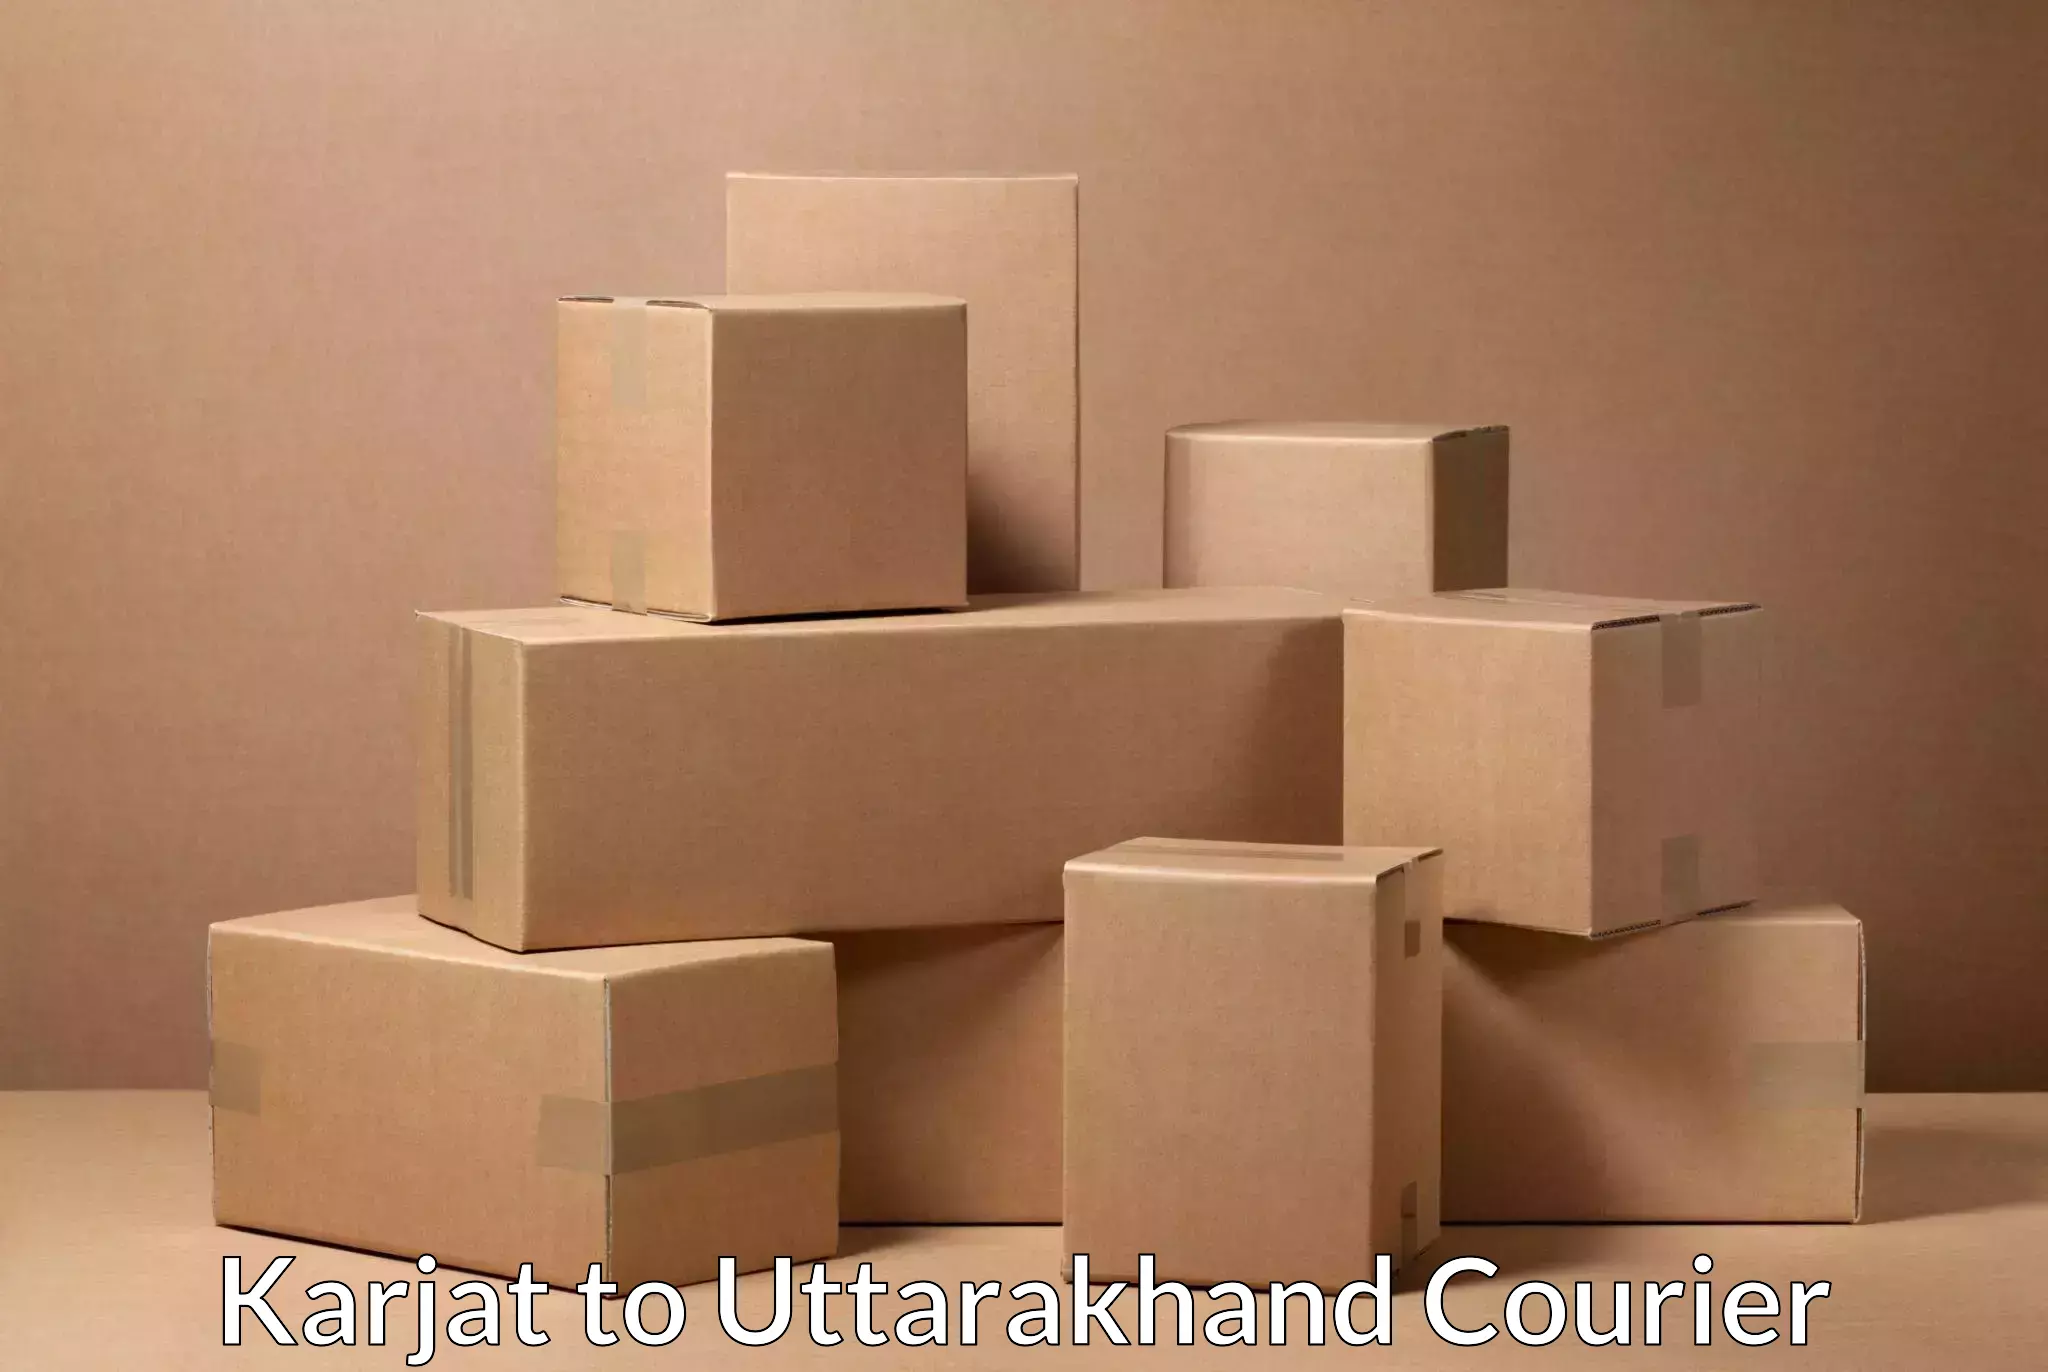 Supply chain delivery Karjat to Rishikesh